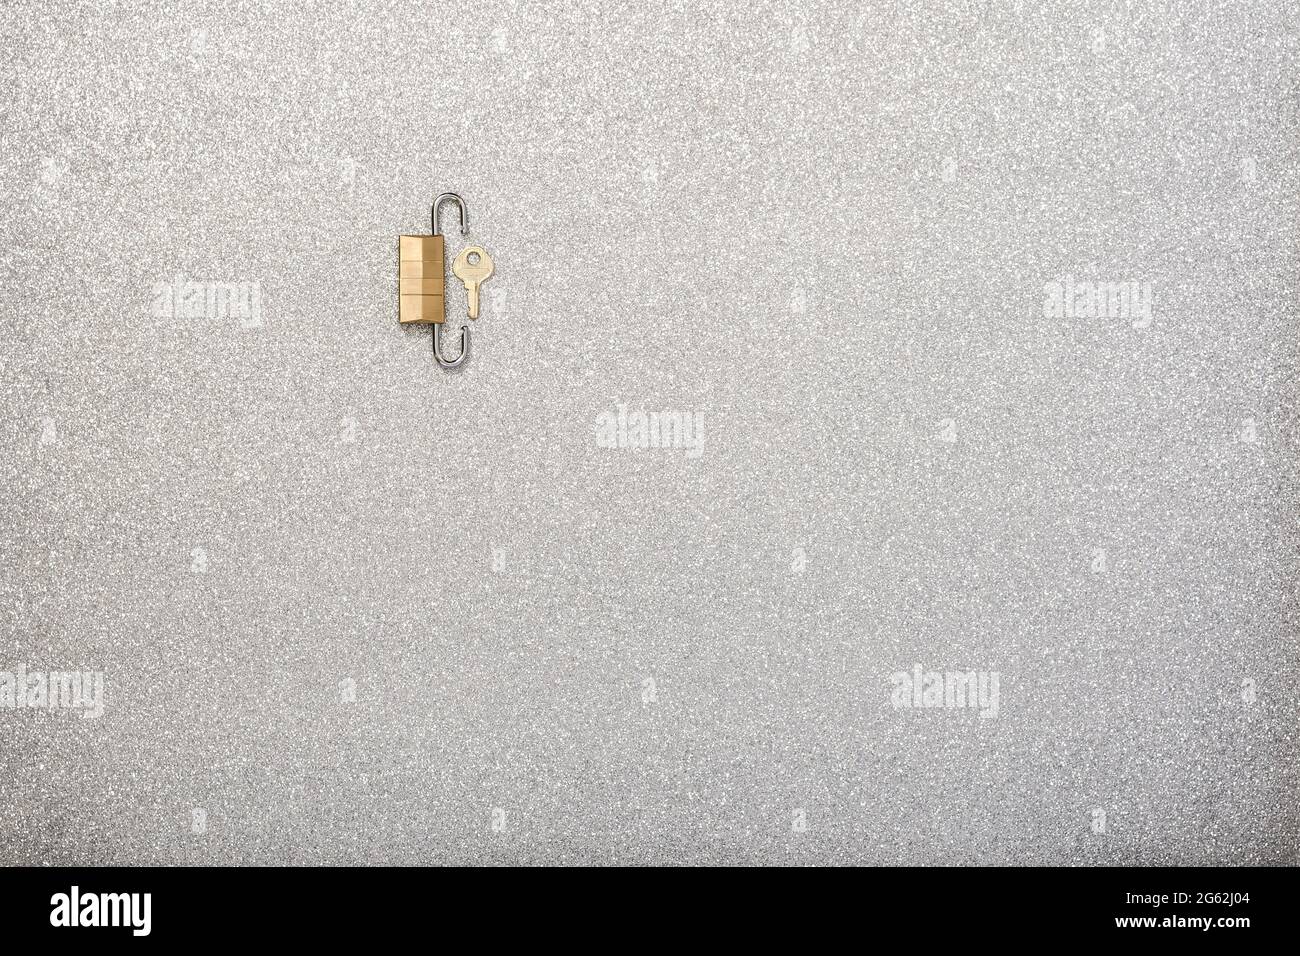 Silver background and two golden padlocks that are intended to show a concept.The photo has copy space to put text and is shot from an overhead point Stock Photo